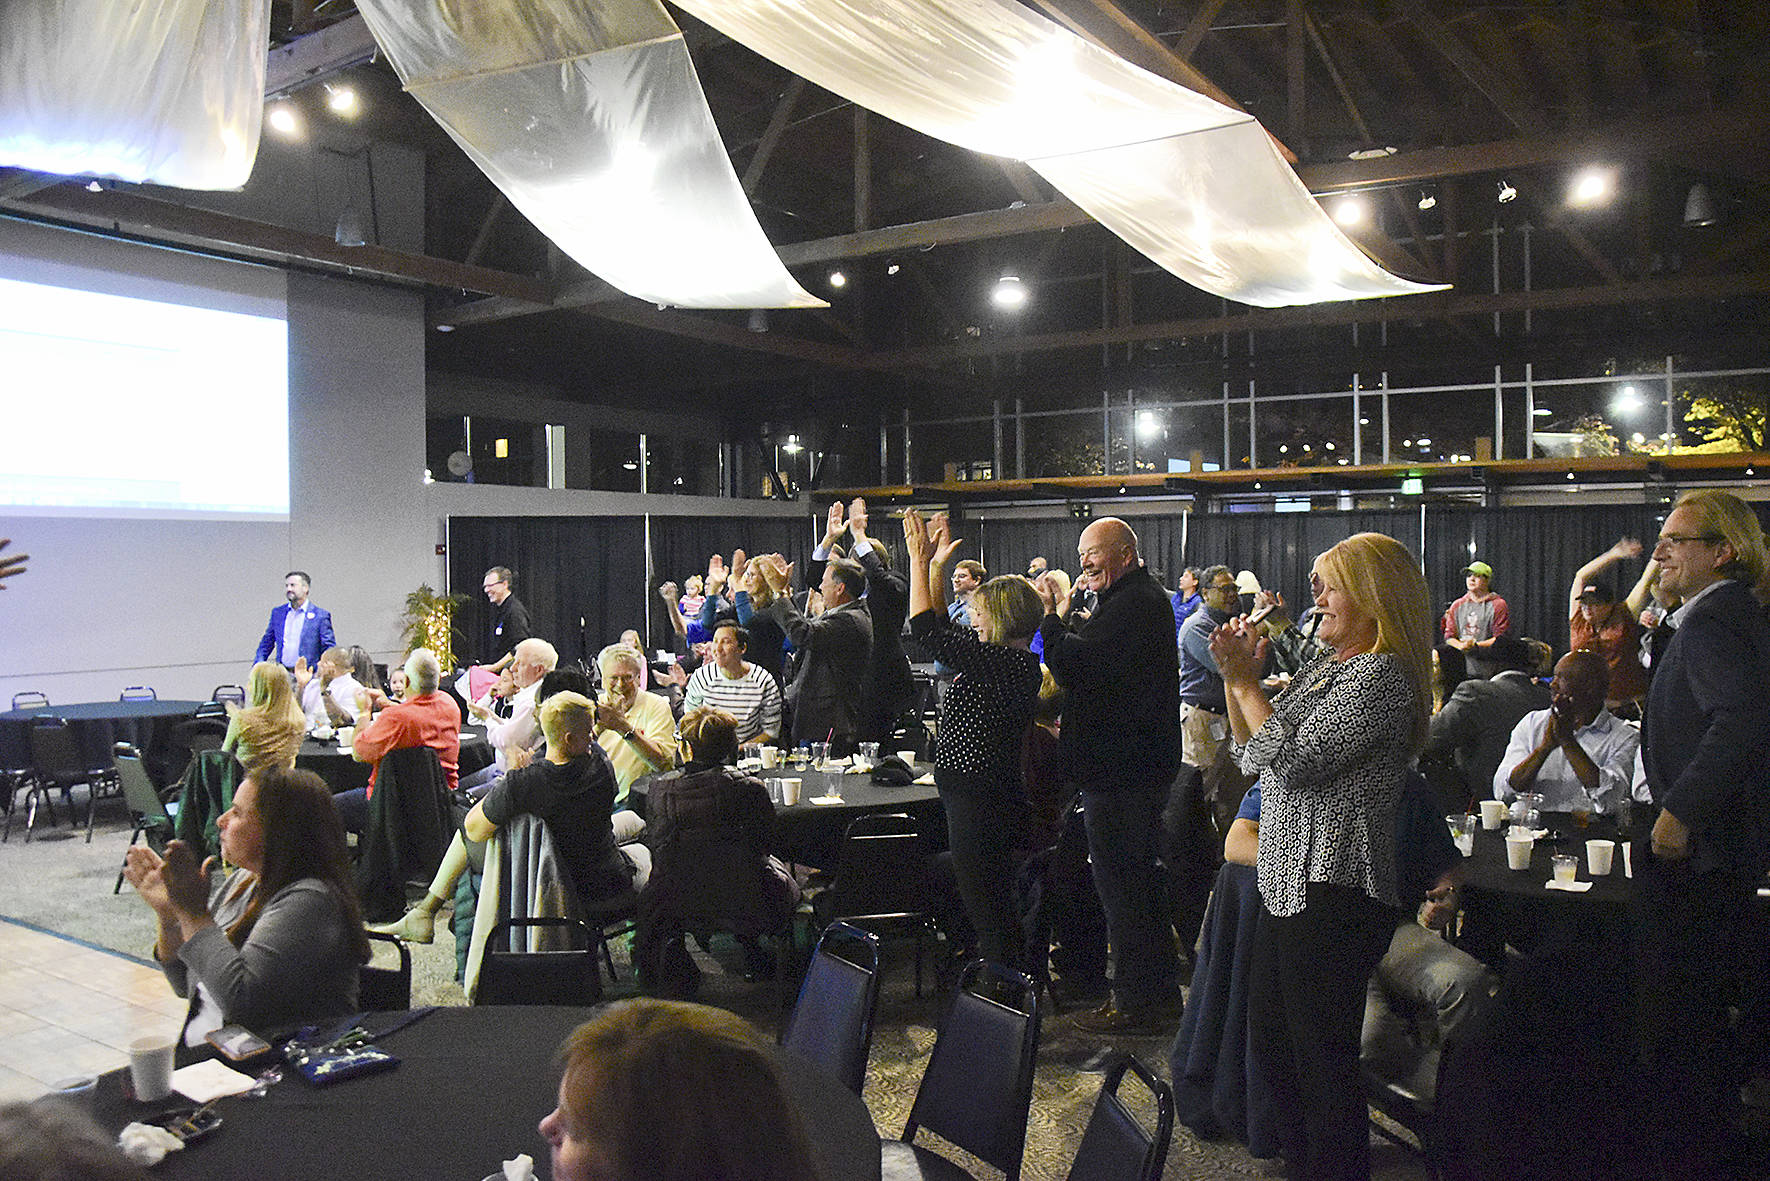 Photo by Gary Palmer. The crowd at Renton Pavillion Events Center including city elected officials, erupted in cheers as Armondo Pavone announced he was ahead in the initial election night results by 918 votes.